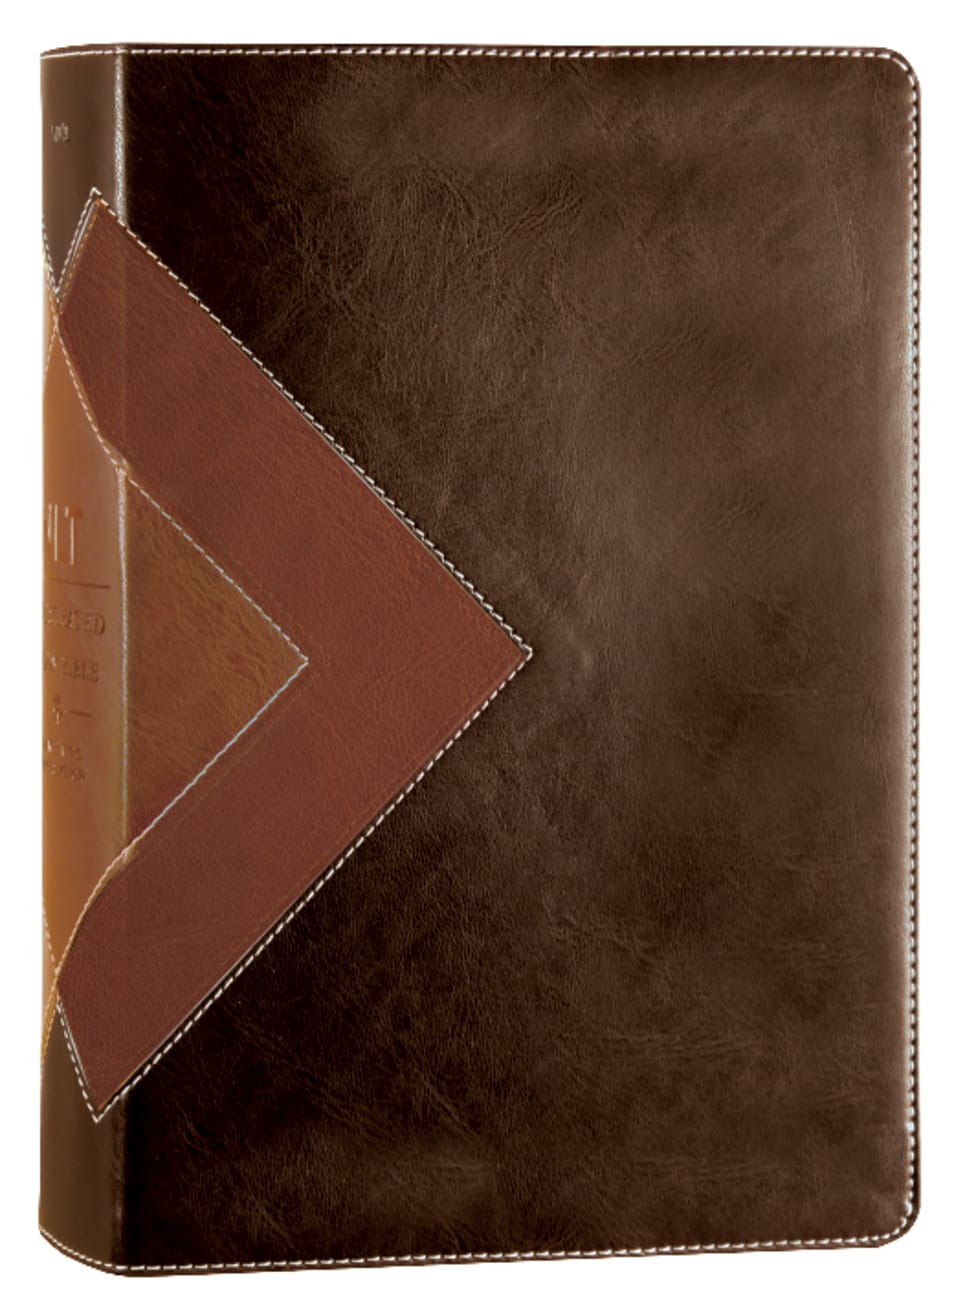 NLT Illustrated Study Bible Brown/Tan (Black Letter Edition) Imitation Leather